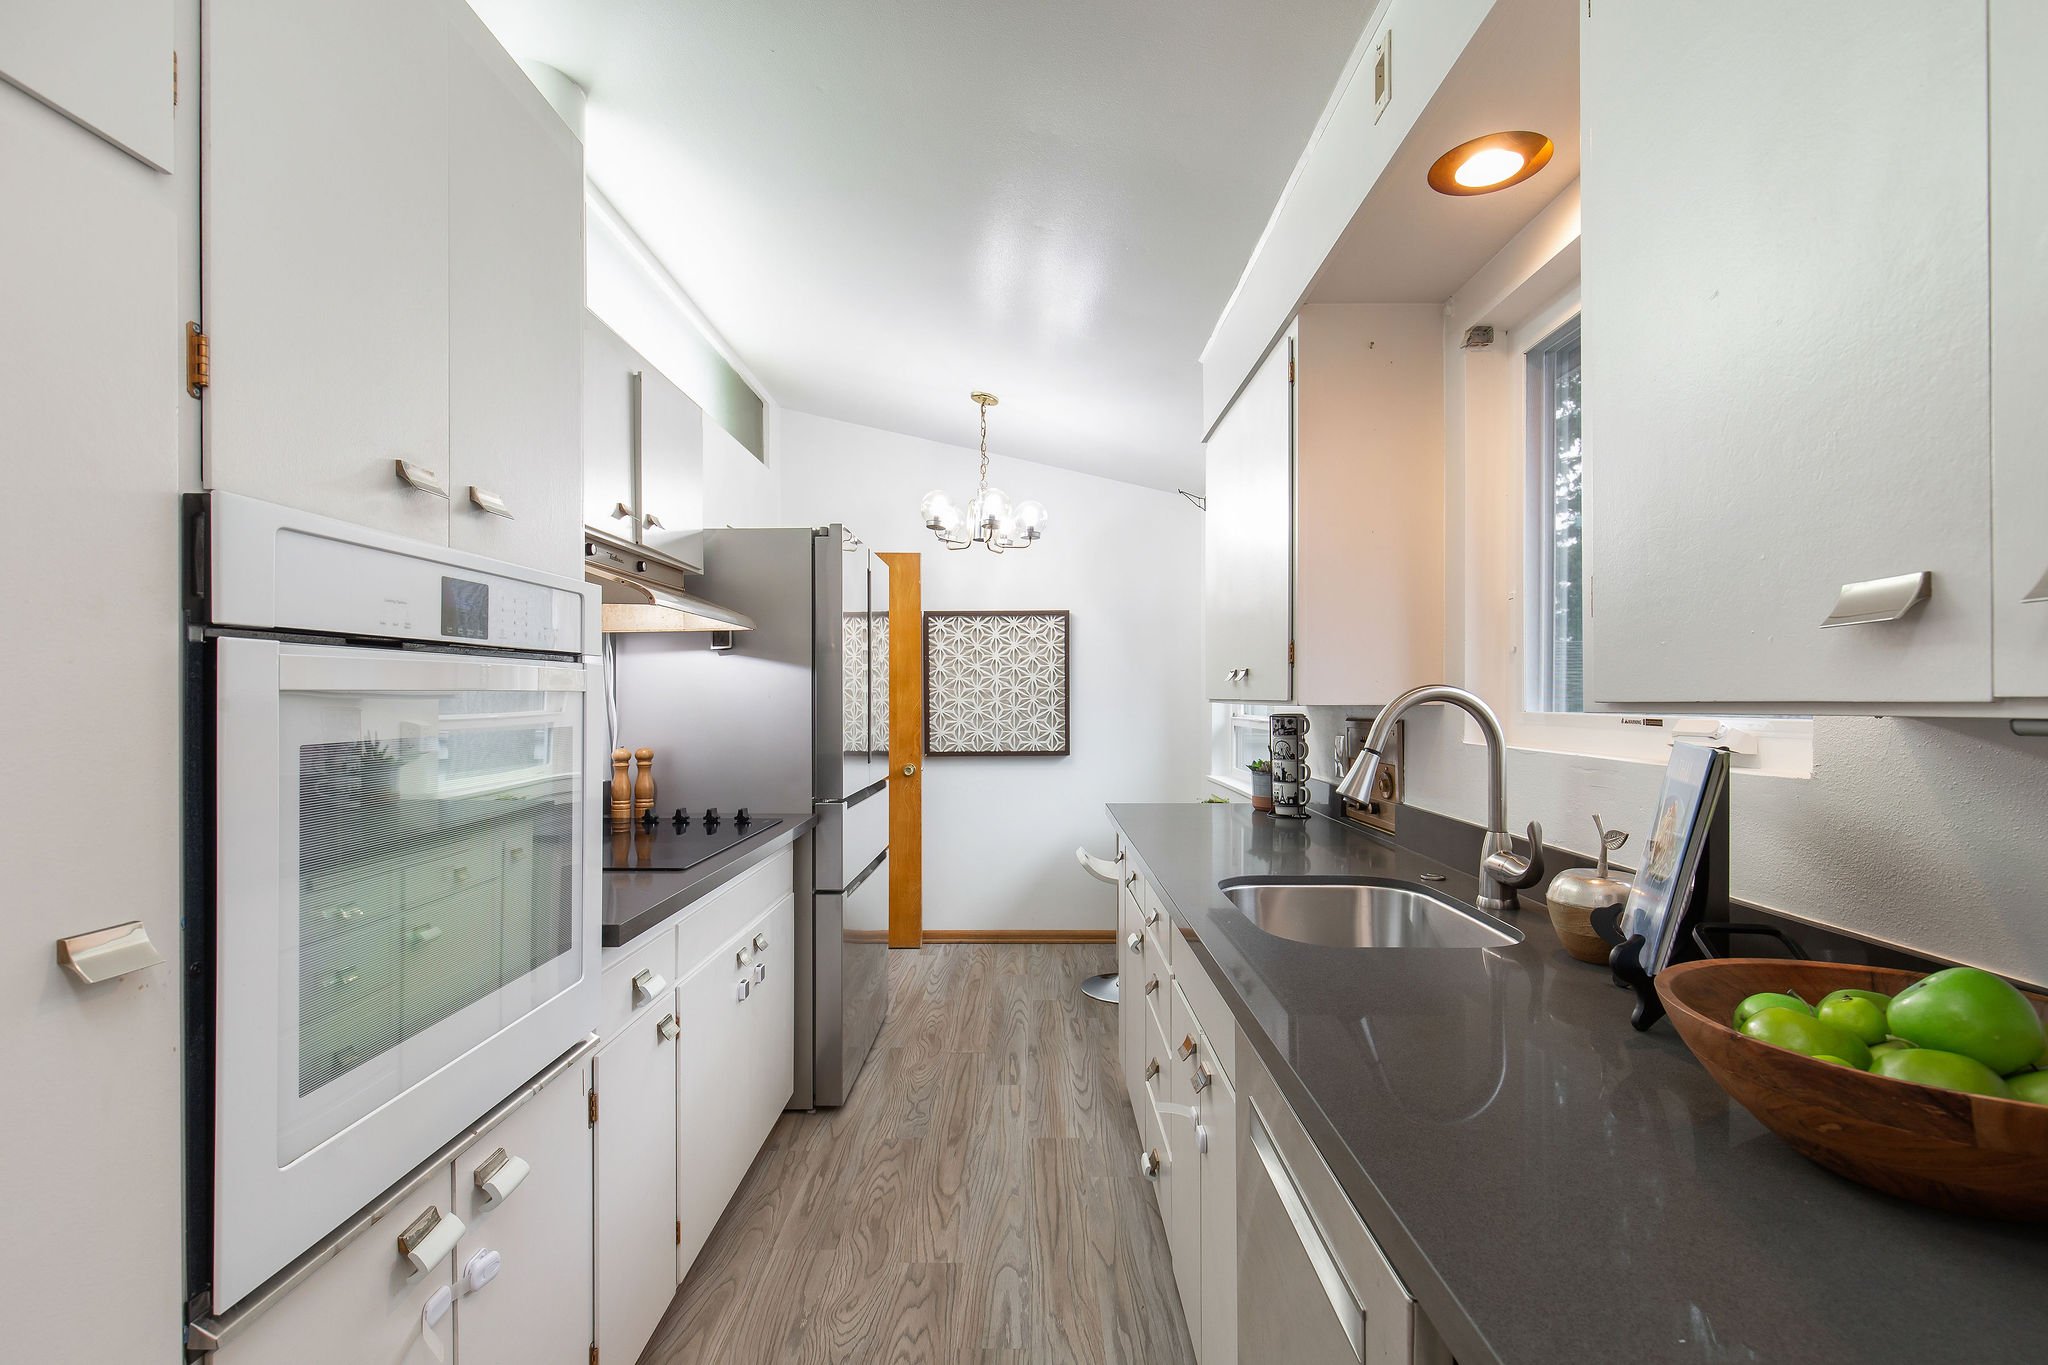  image description: interior of kitchen wit grey countertops, white cabinets, and windows 